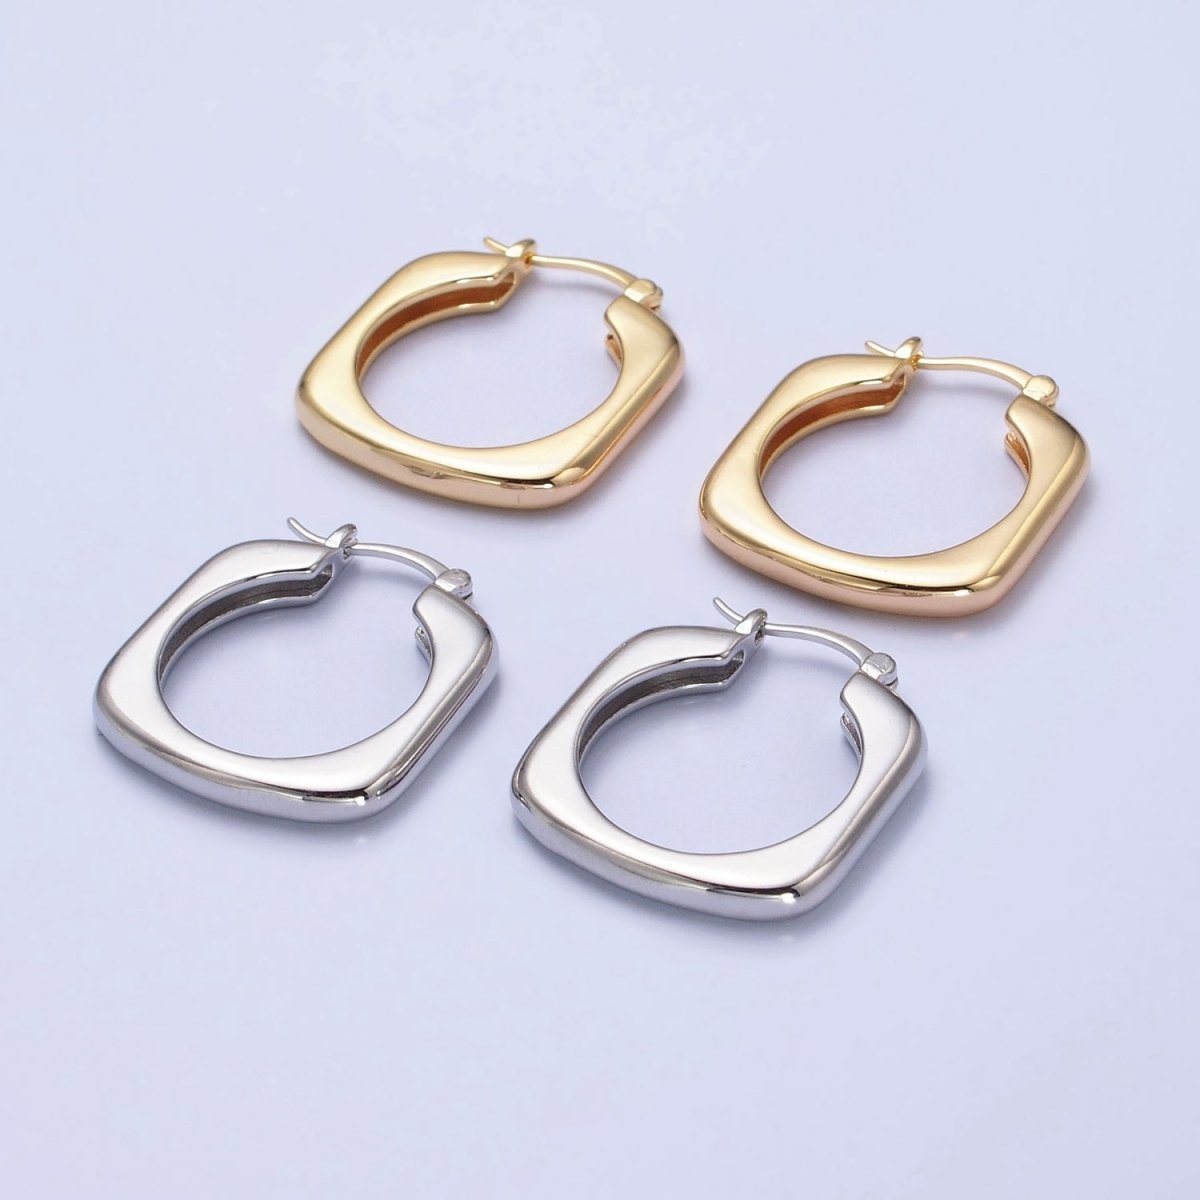 Gold, Silver Geometric Abstract Square Triangle Statement Latch Earrings | AB545 AB546 - DLUXCA